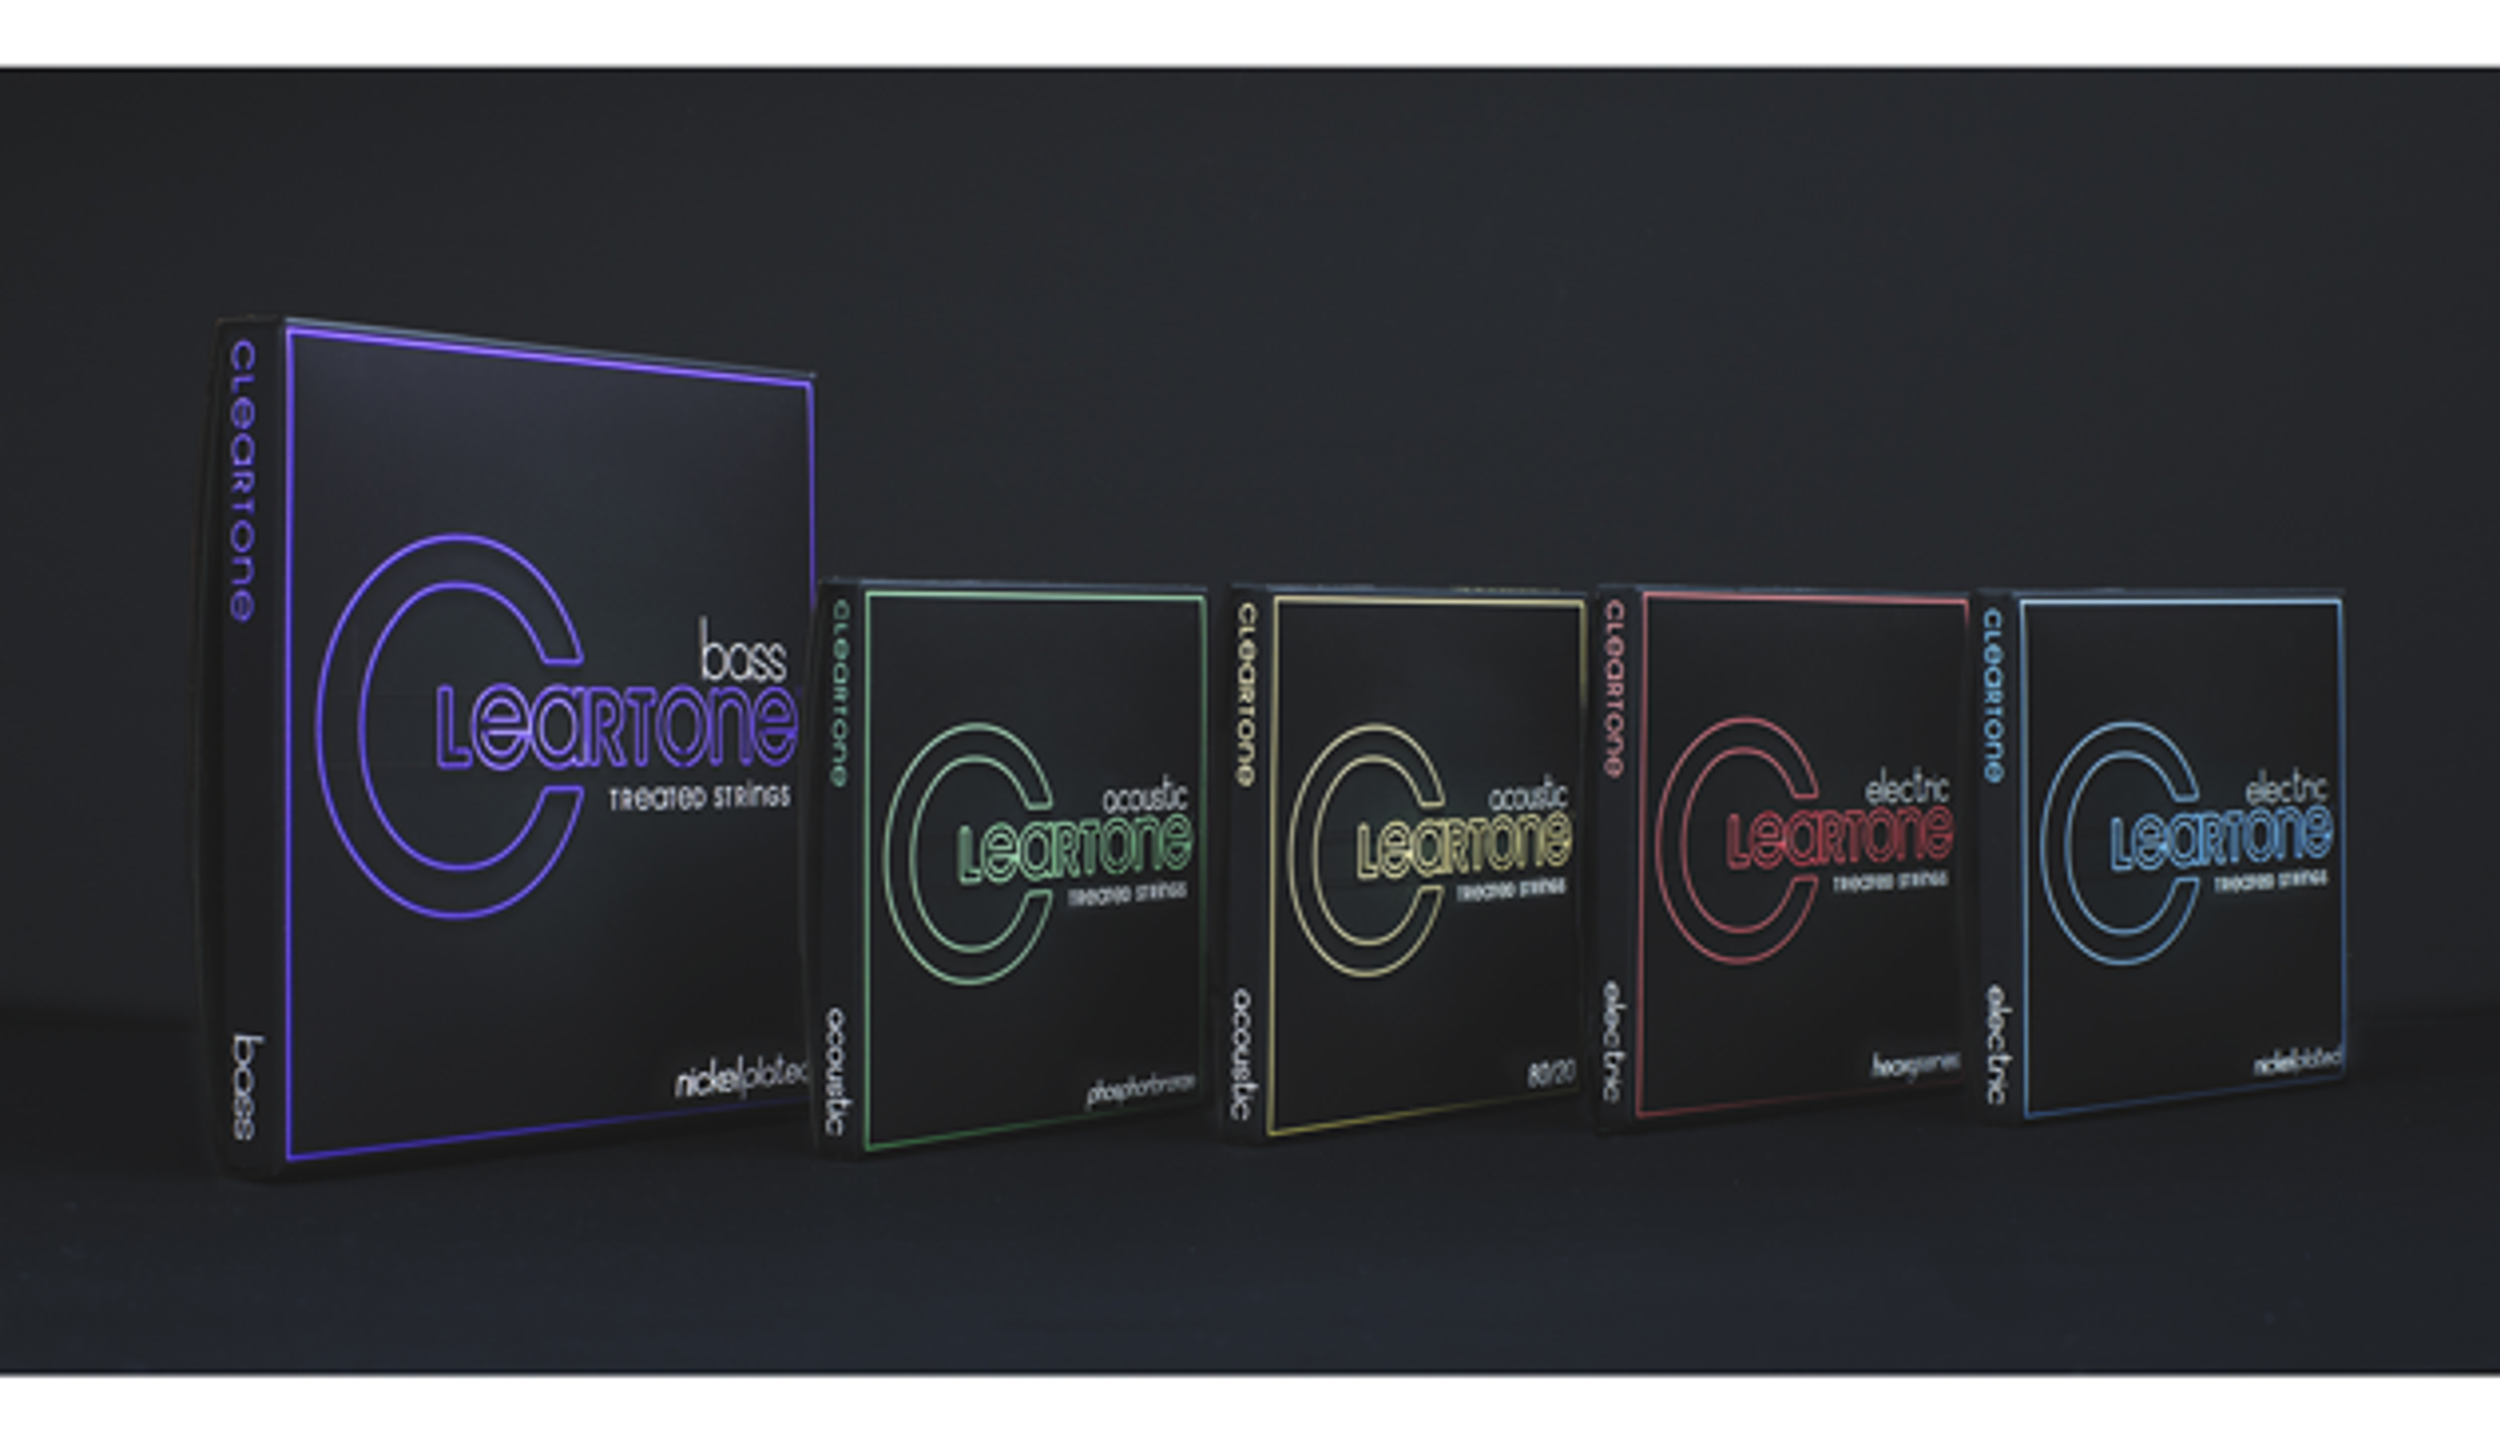 Cleartone Launches Redesigned Coated Strings